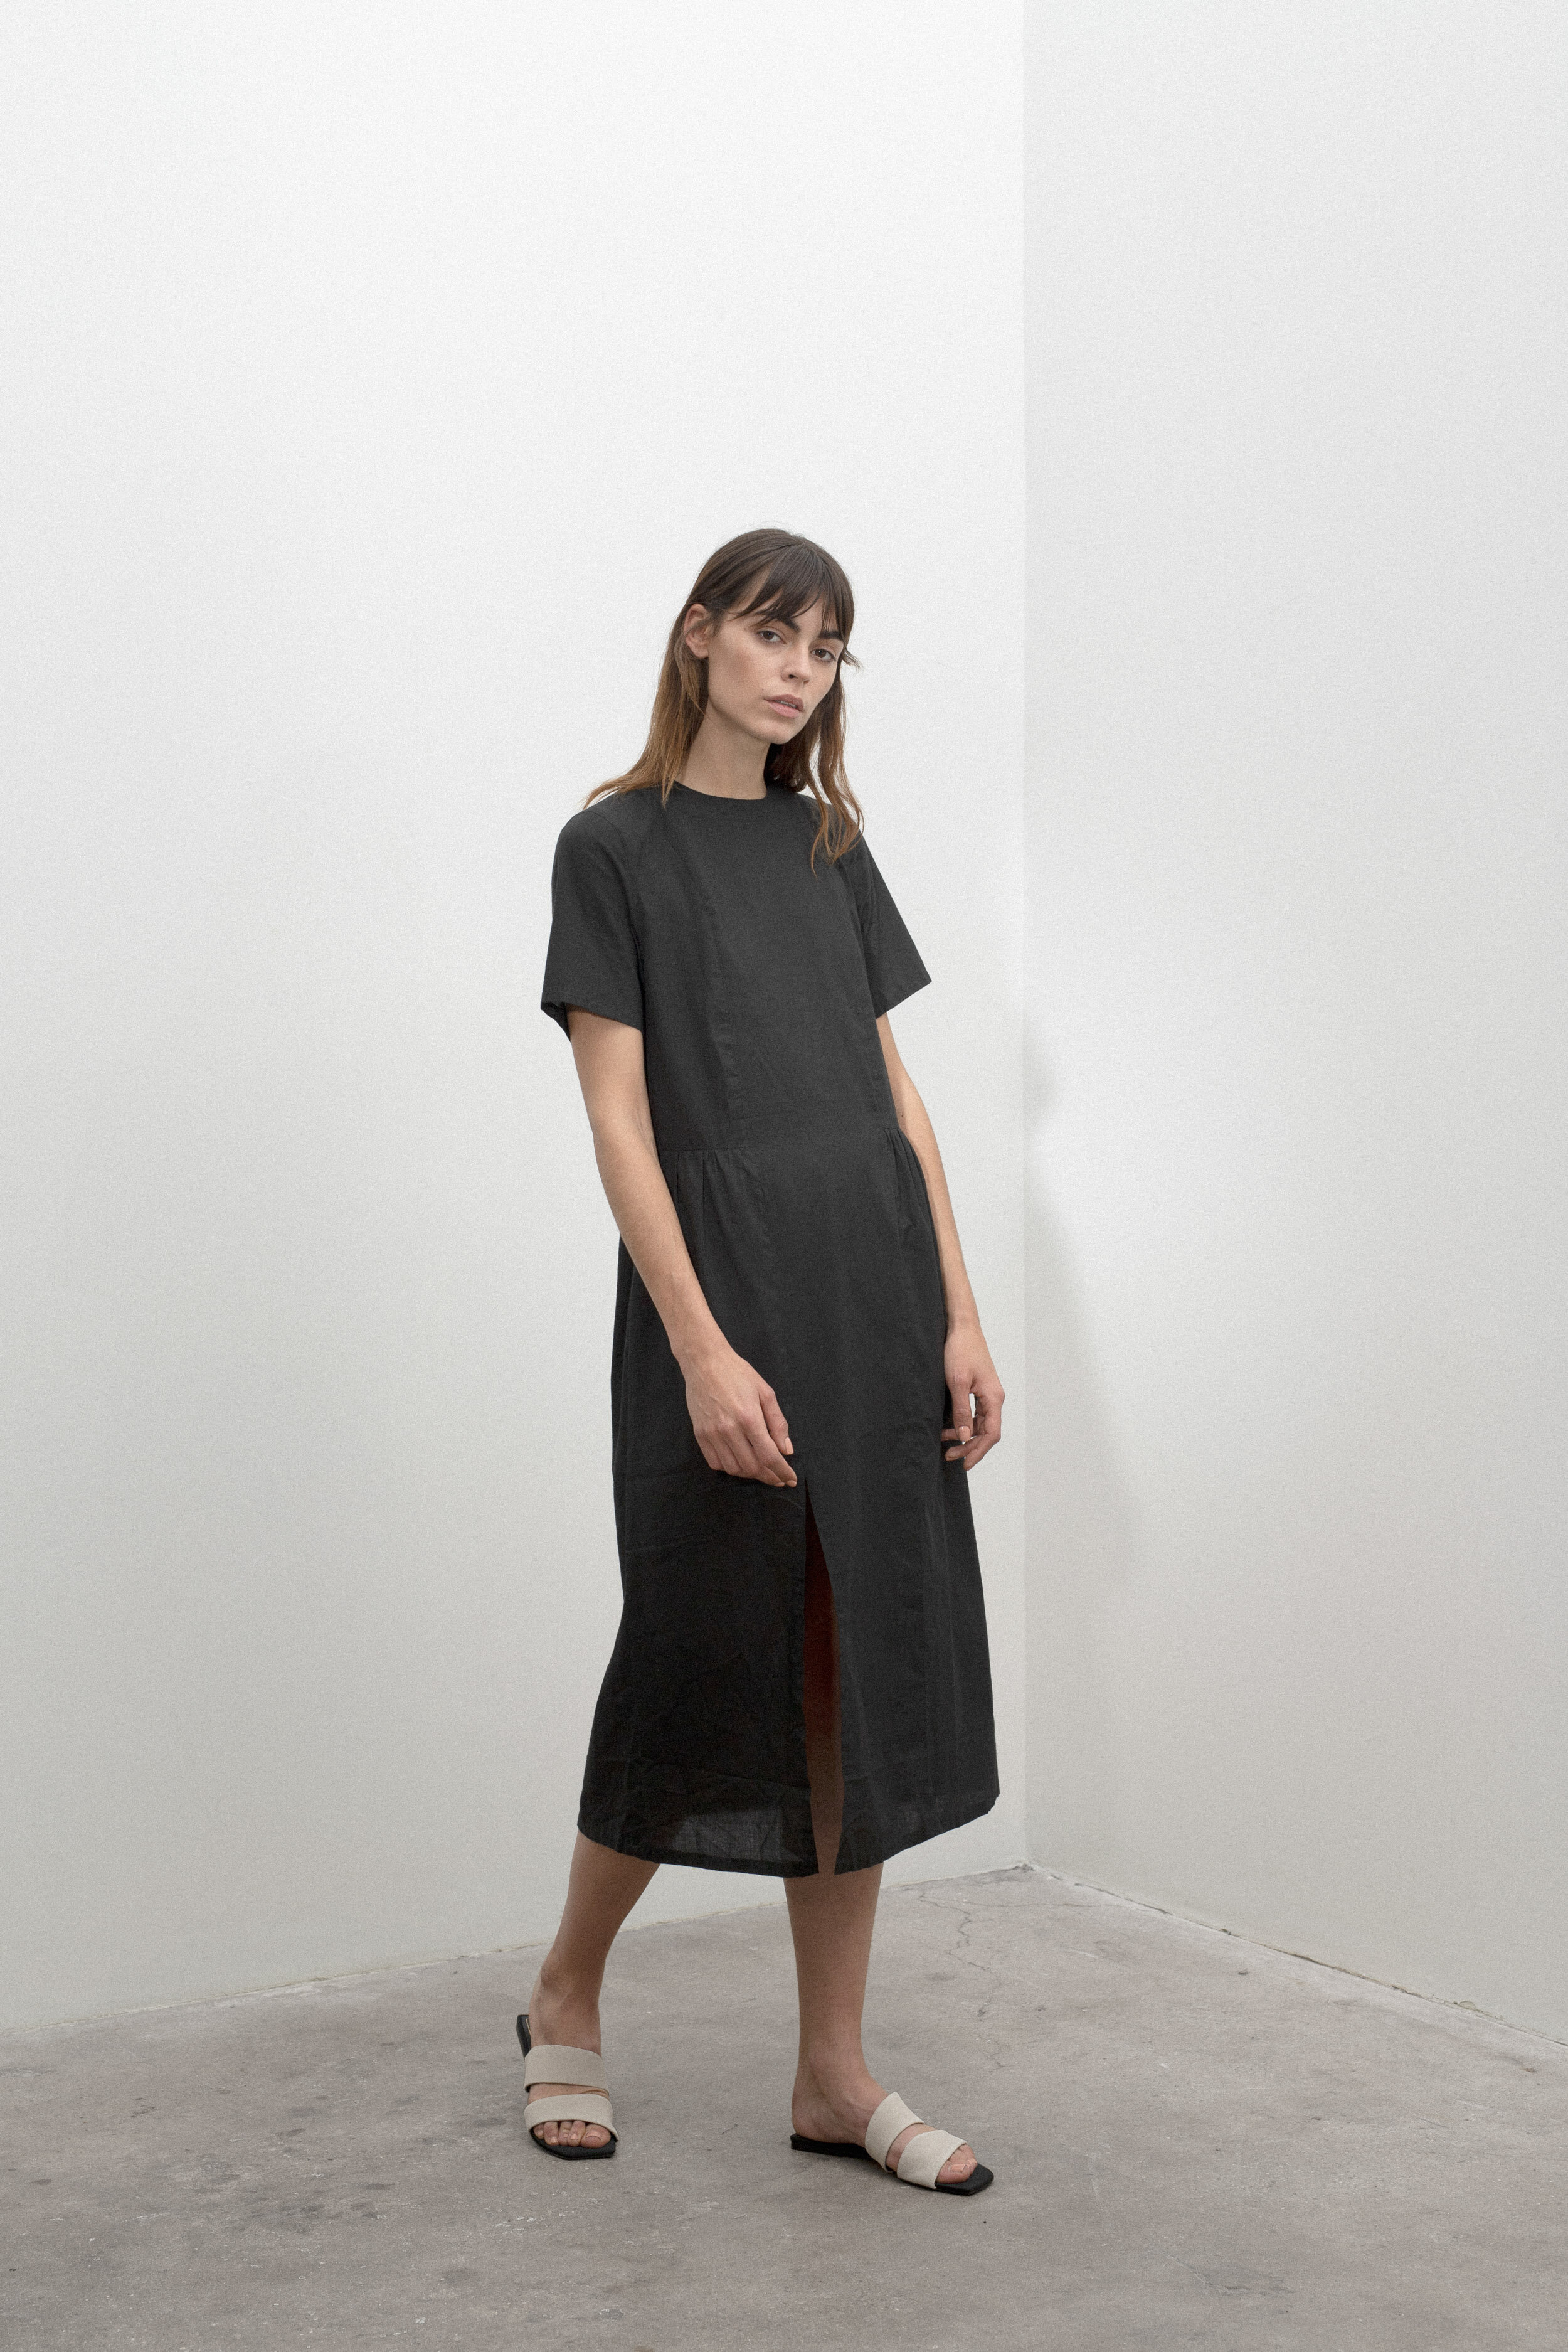 Norse Projects Women's Spring/Summer '20 — eye_C